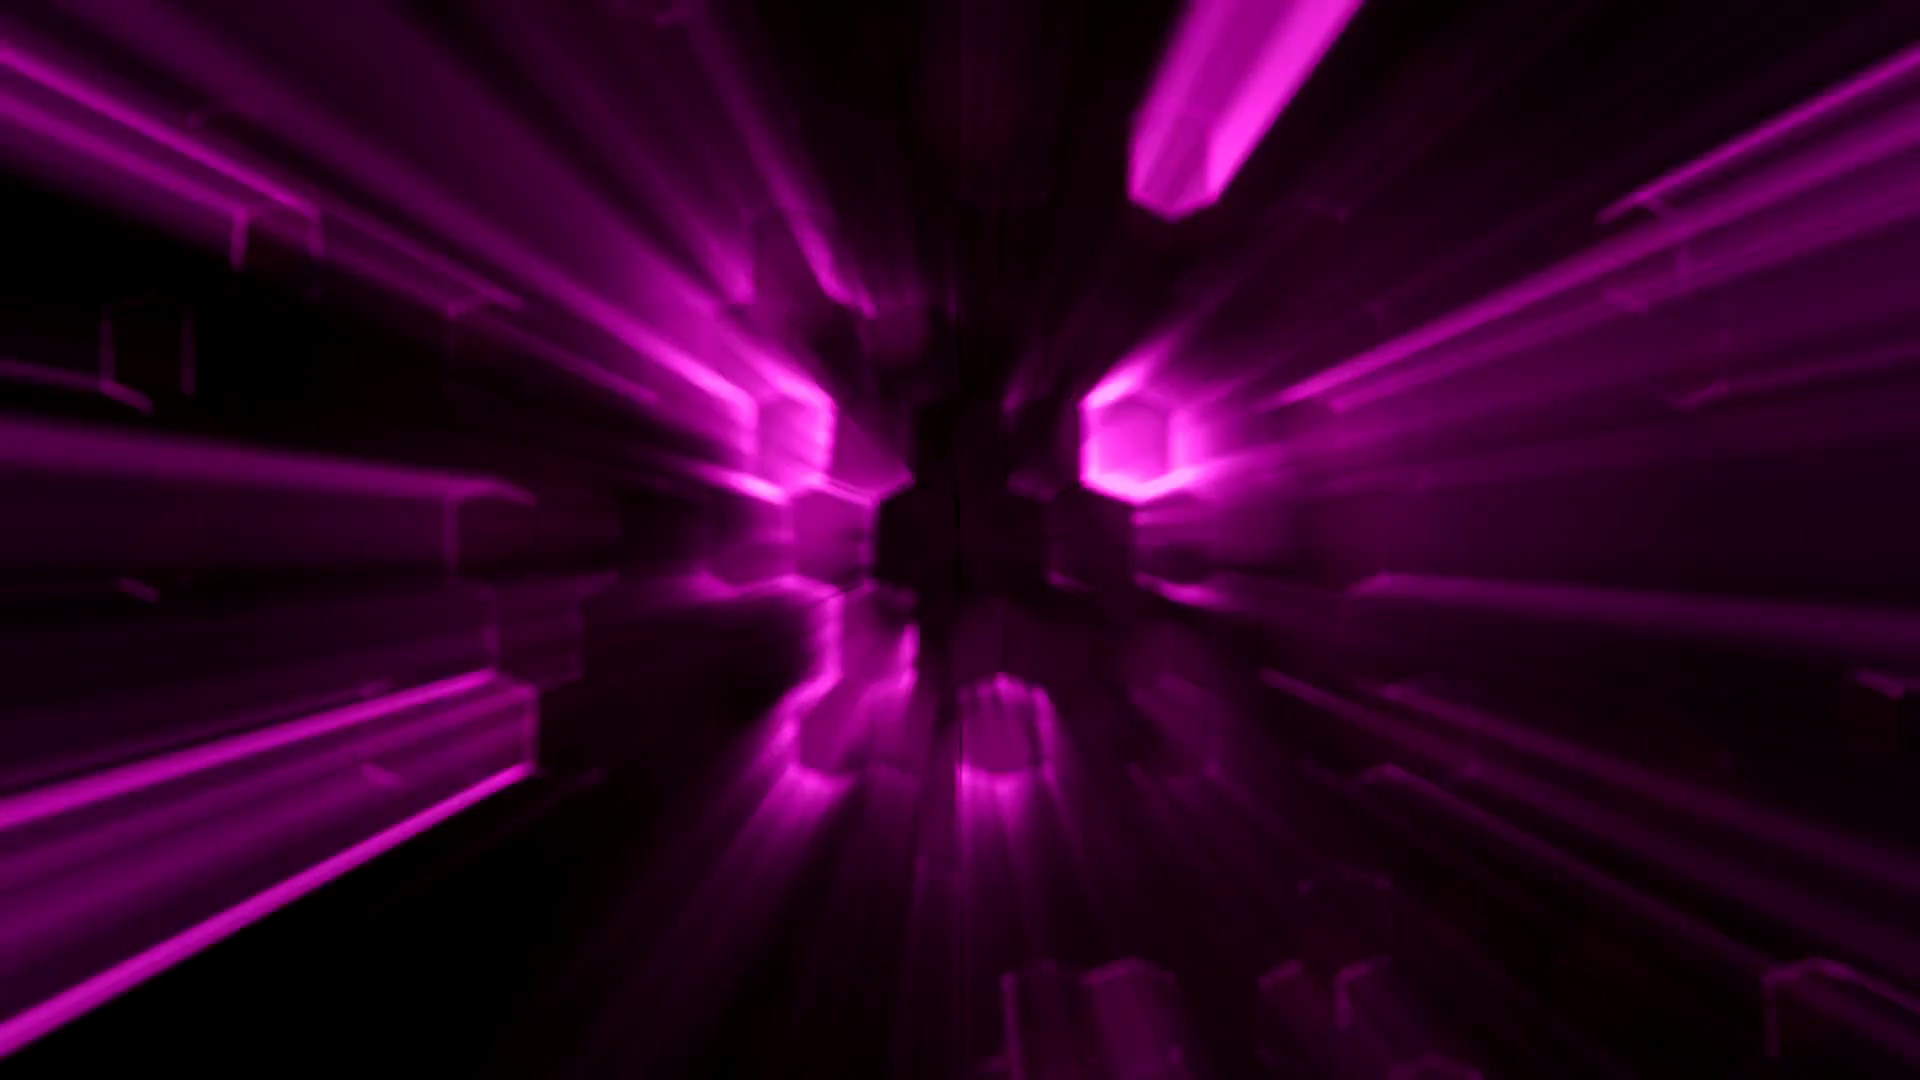 1920x1080 Purple Abstract Hexagons Animation with Neon Effect and Light Rays  Background Backdrop Motion Background - VideoBlocks